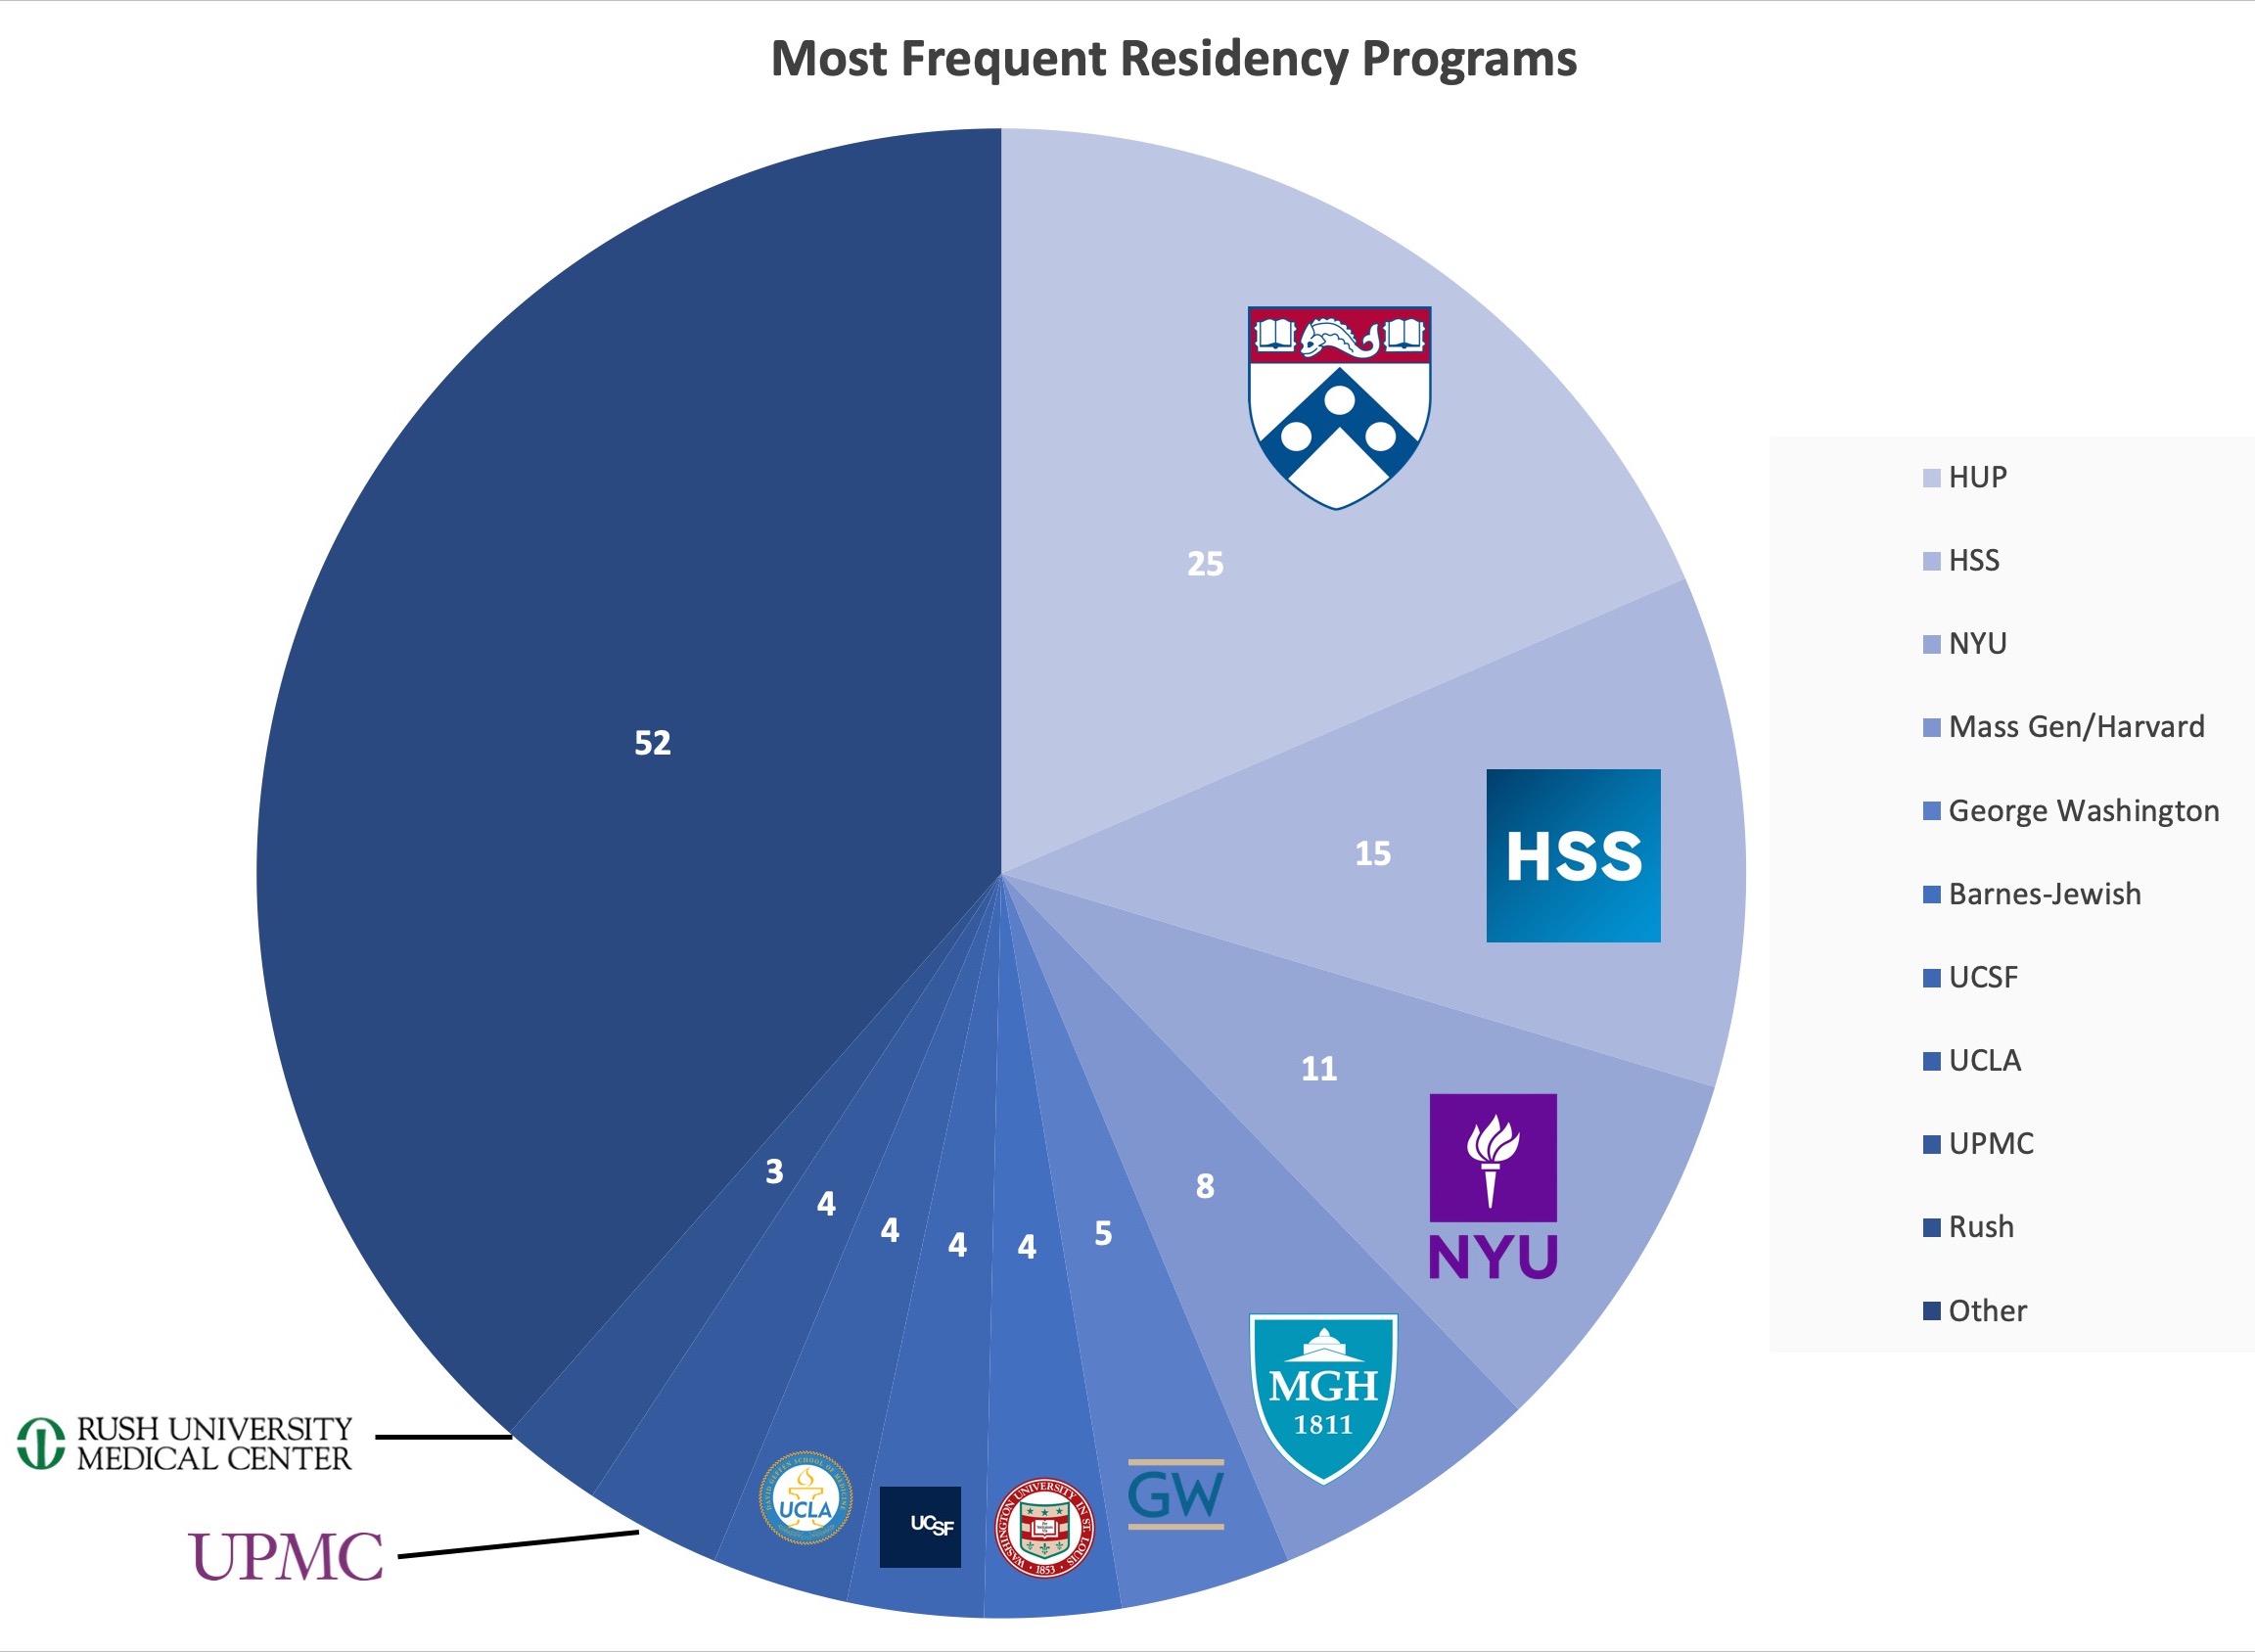 Pie chart of residency matches - see description in the text below